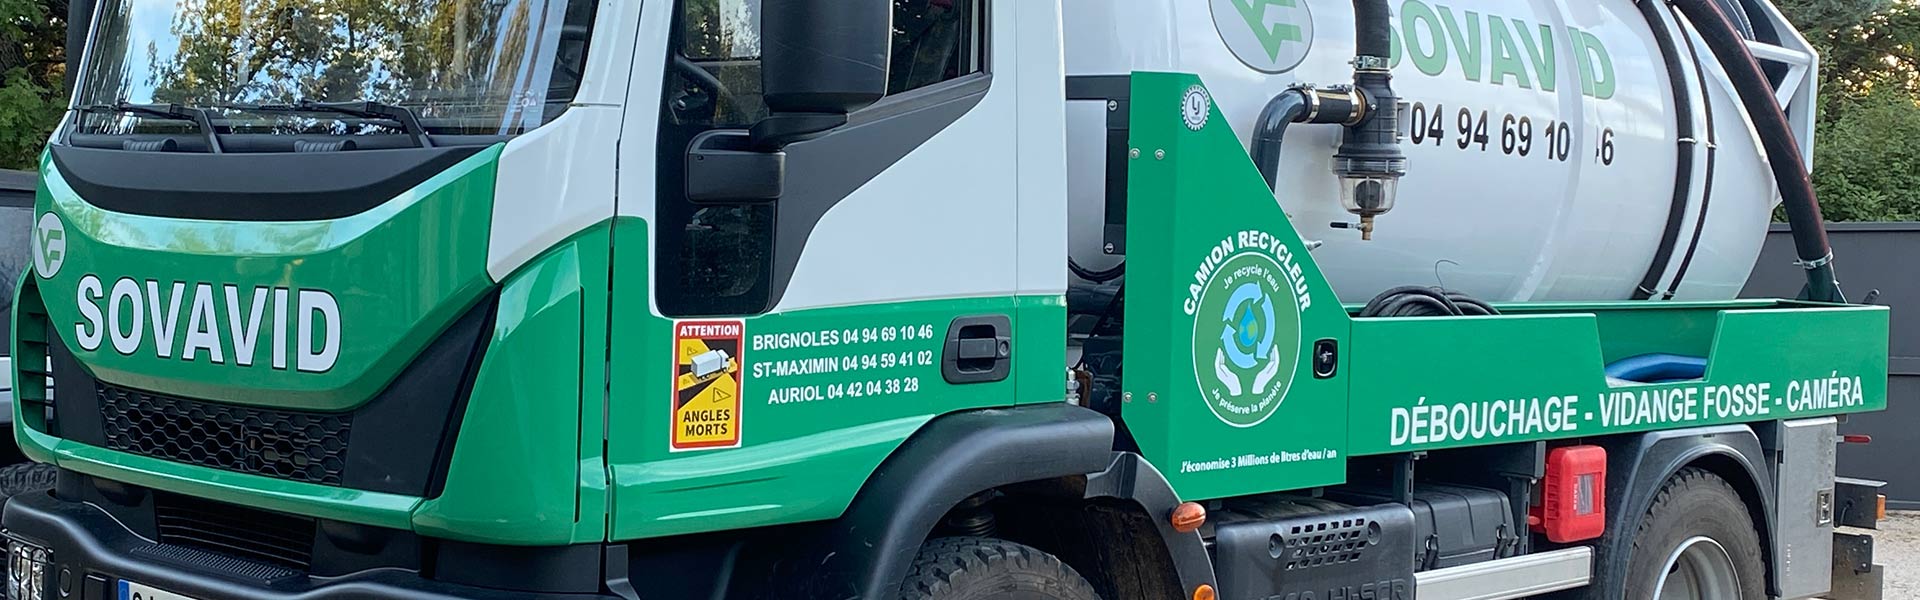 camion recycleur sovavid